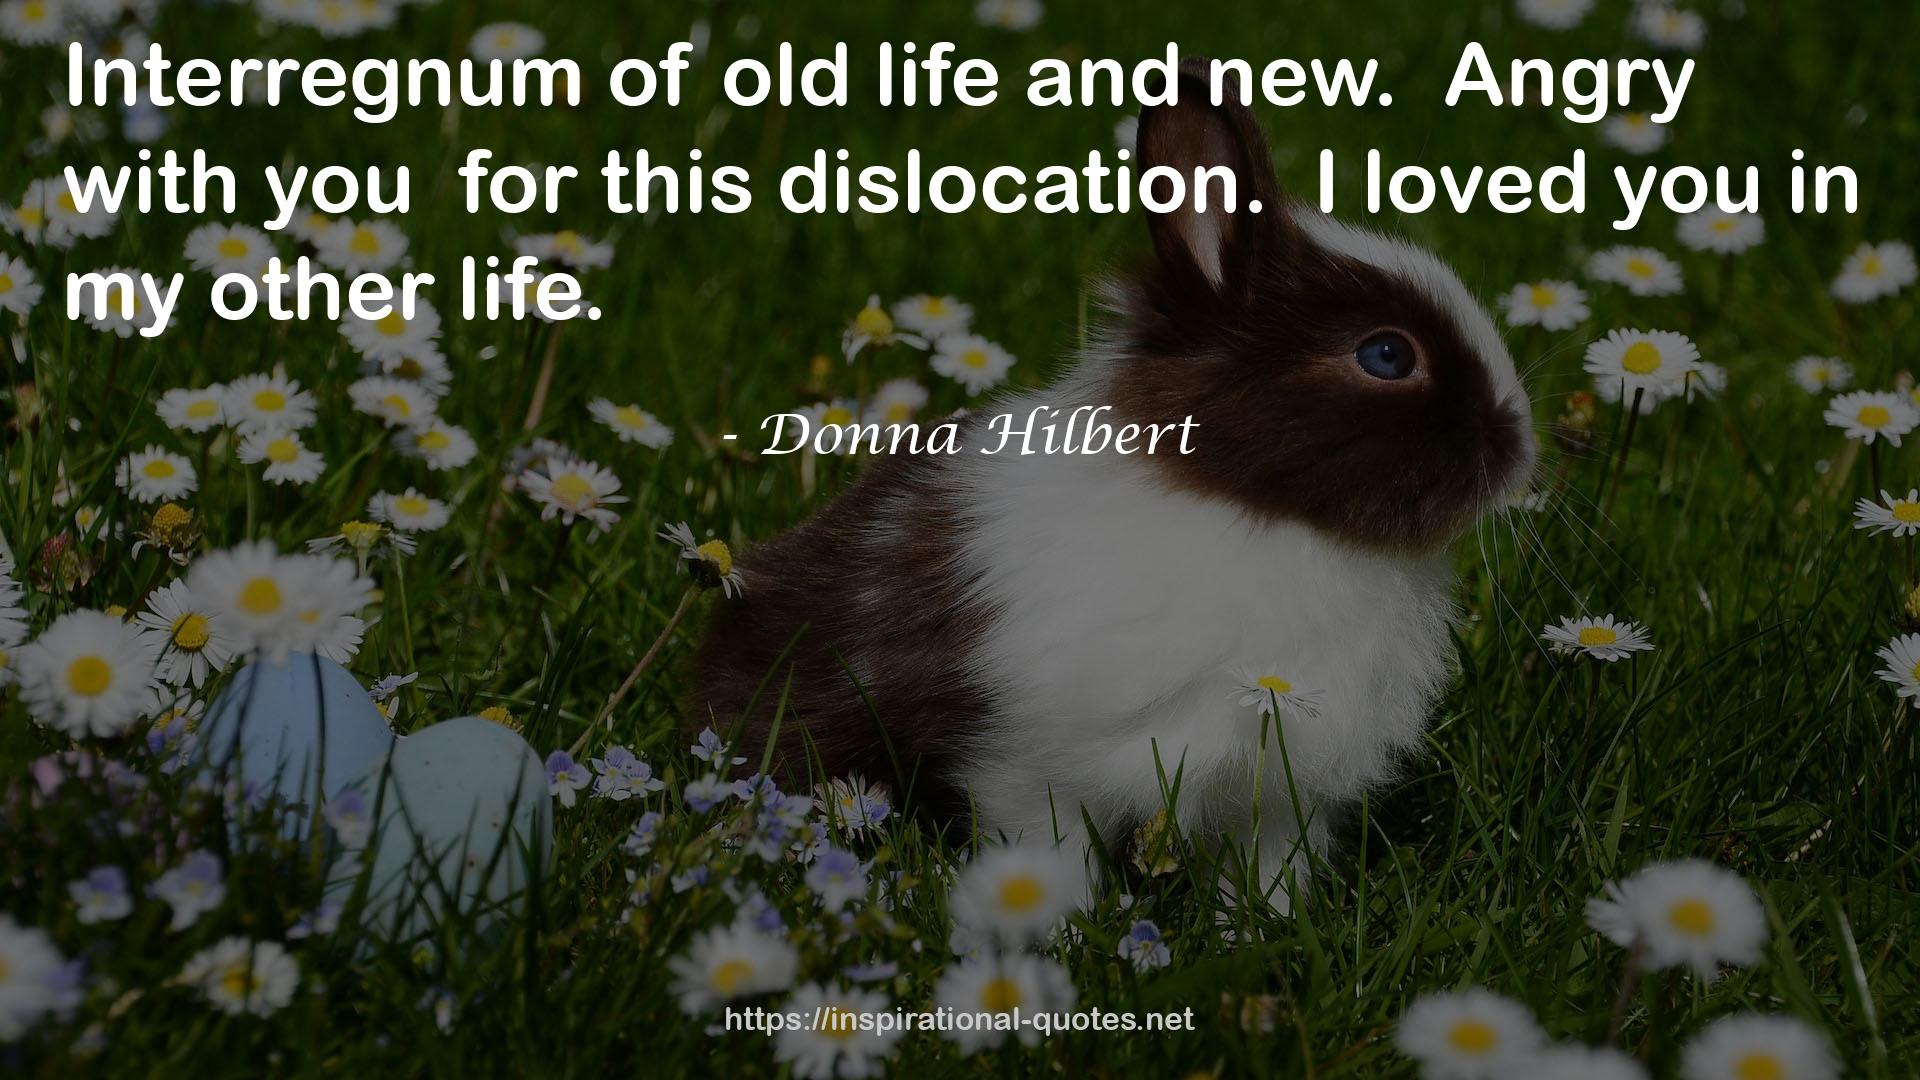 Donna Hilbert QUOTES